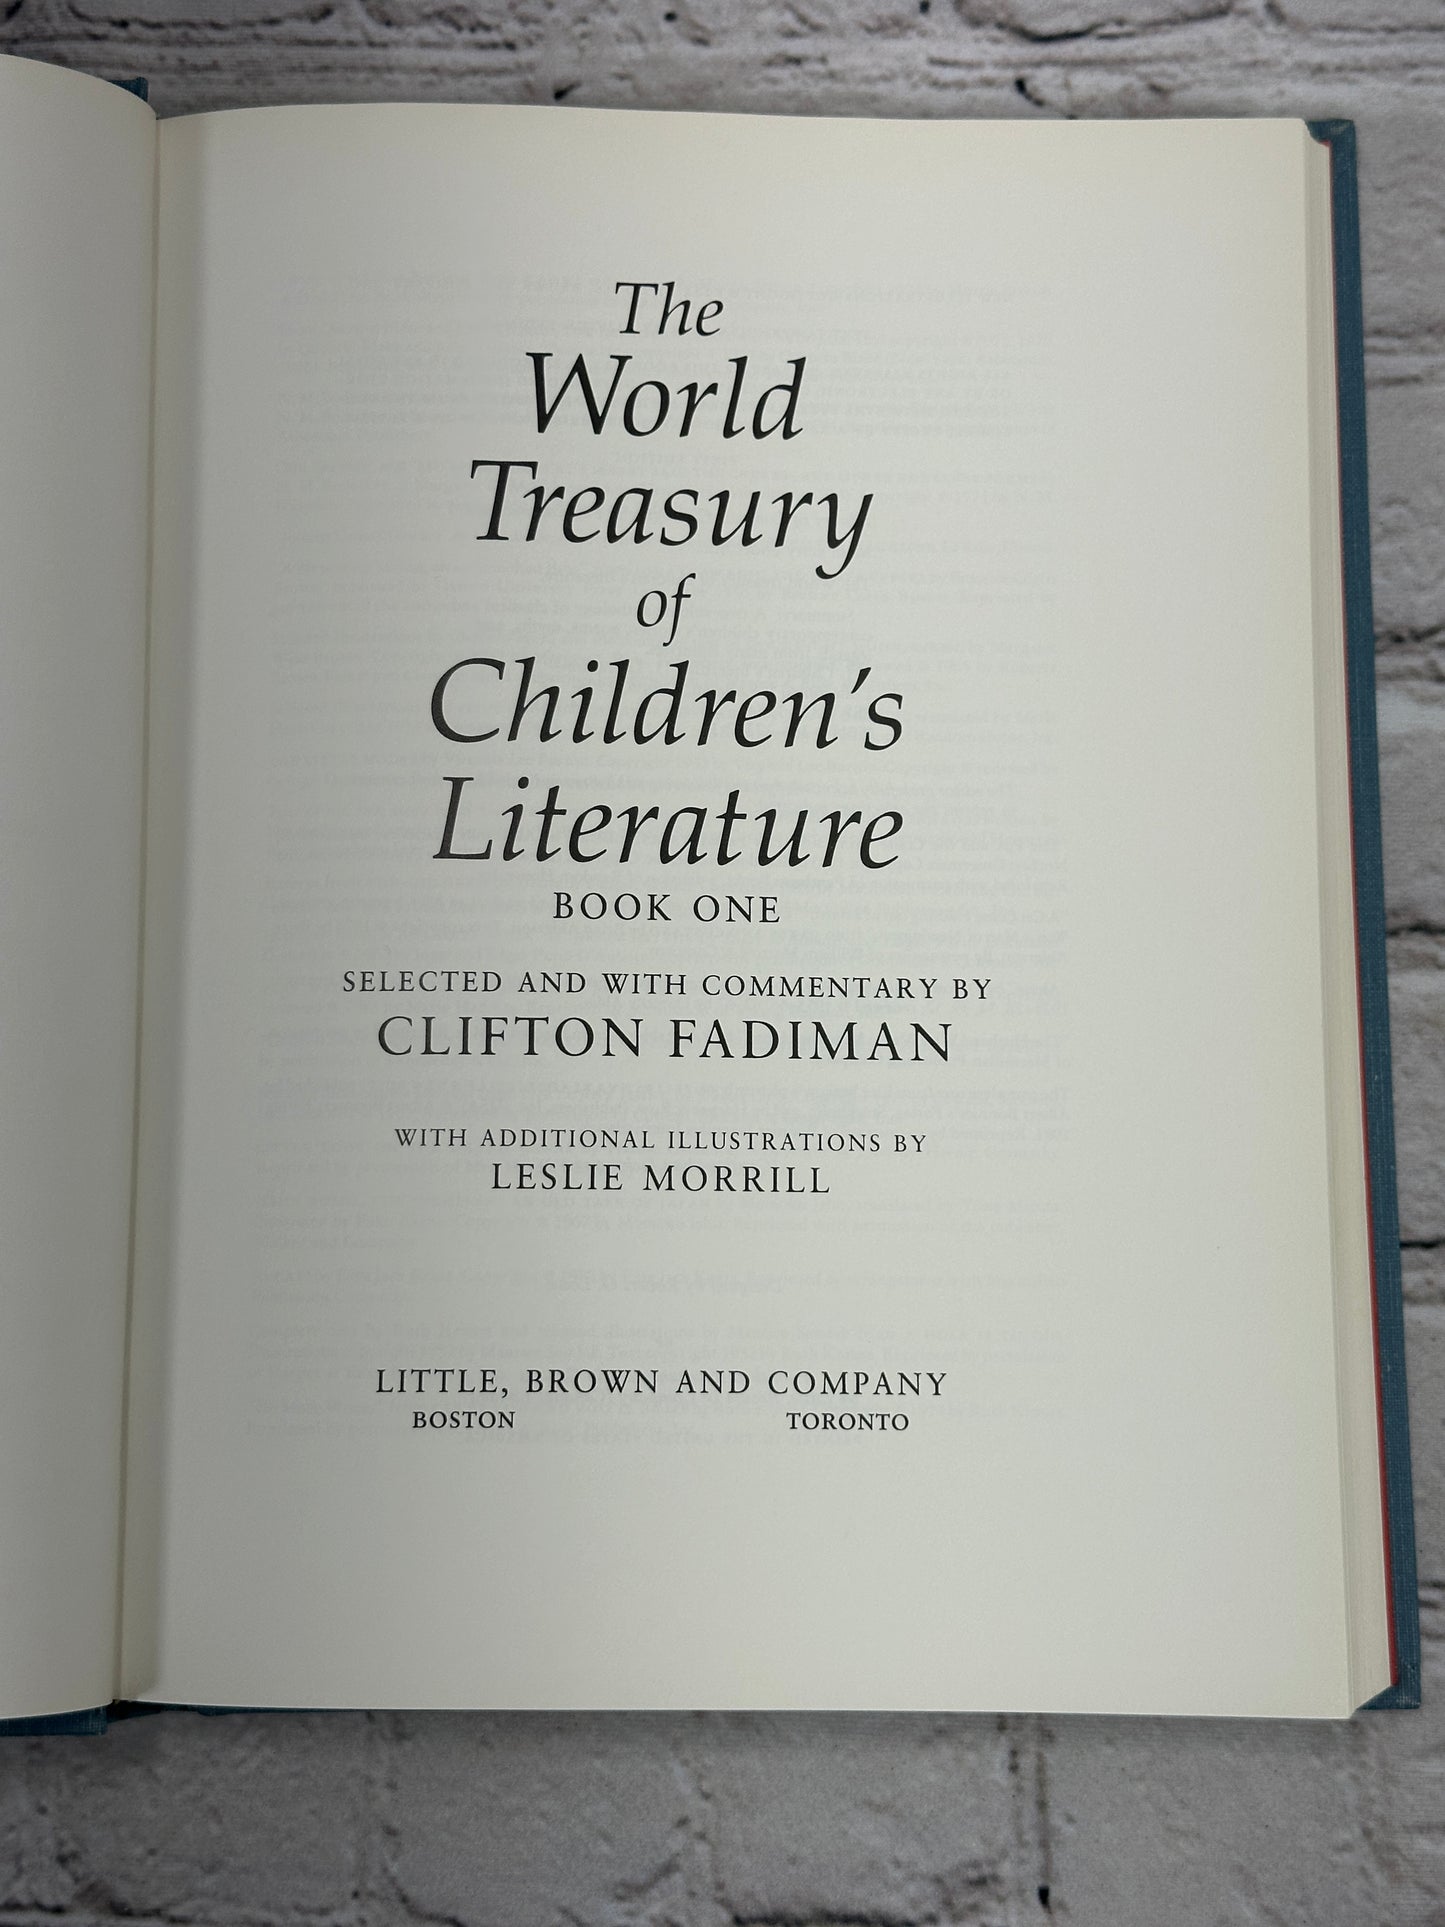 The World Treasury of Children's Literature edited by Clifton Fadiman [1984]